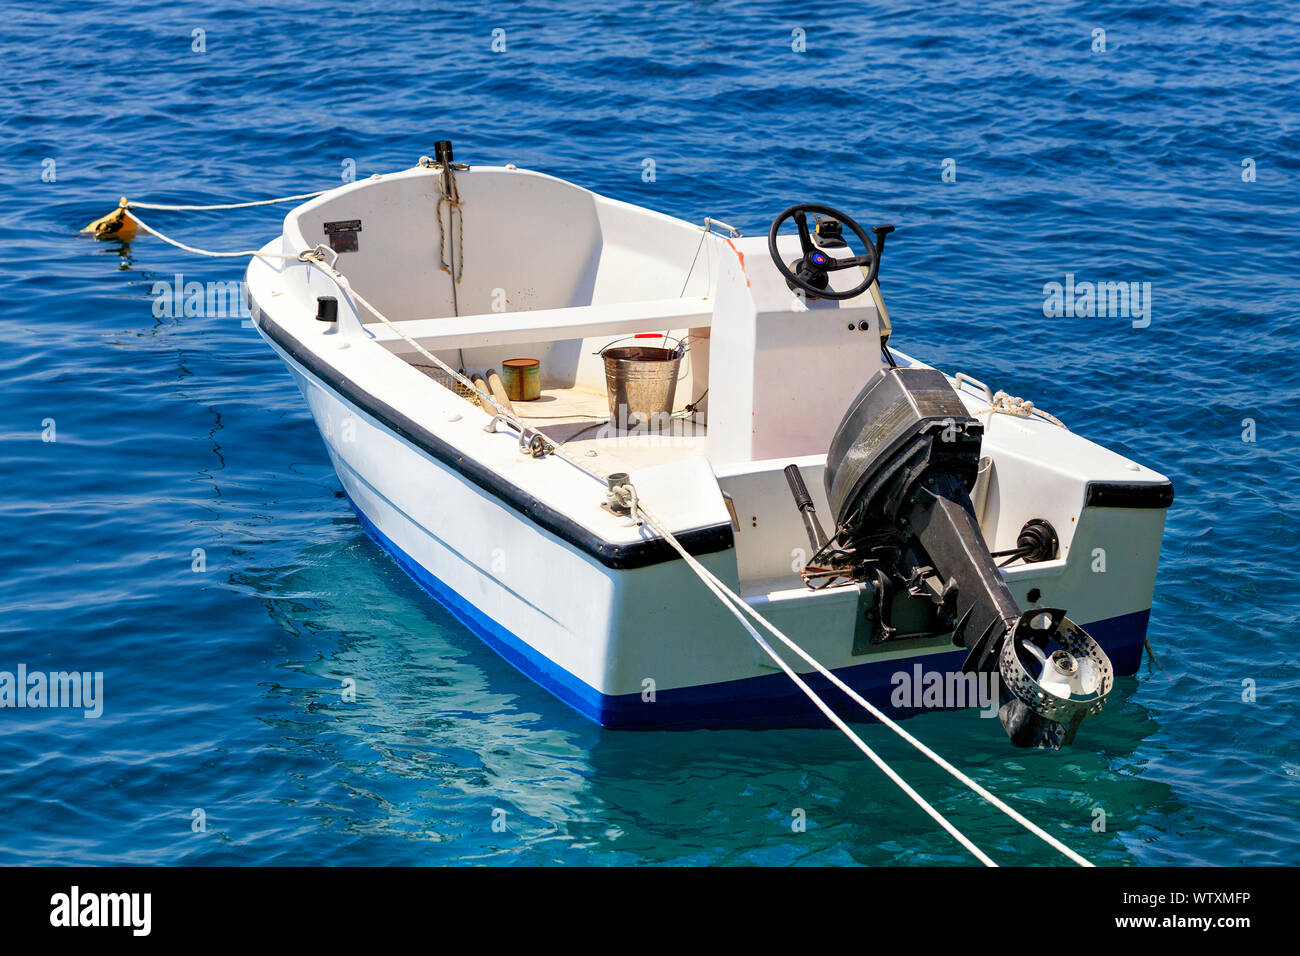 A fishing motor boat is anchored in the clear turquoise waters of